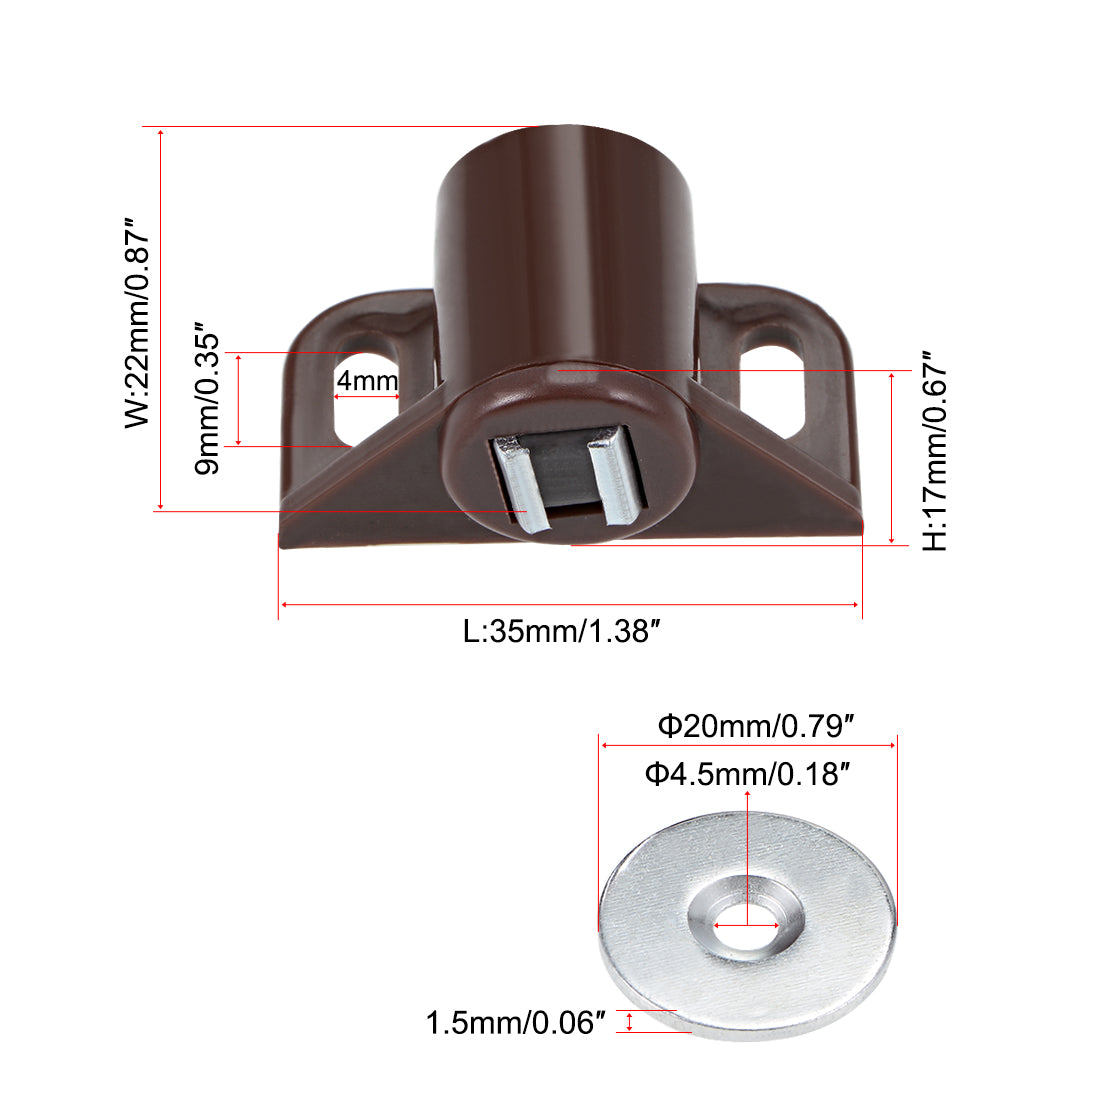 uxcell Uxcell Magnetic Latches Catch Cabinet Door Magnet Latch for Cupboard Closet Brown 6pcs